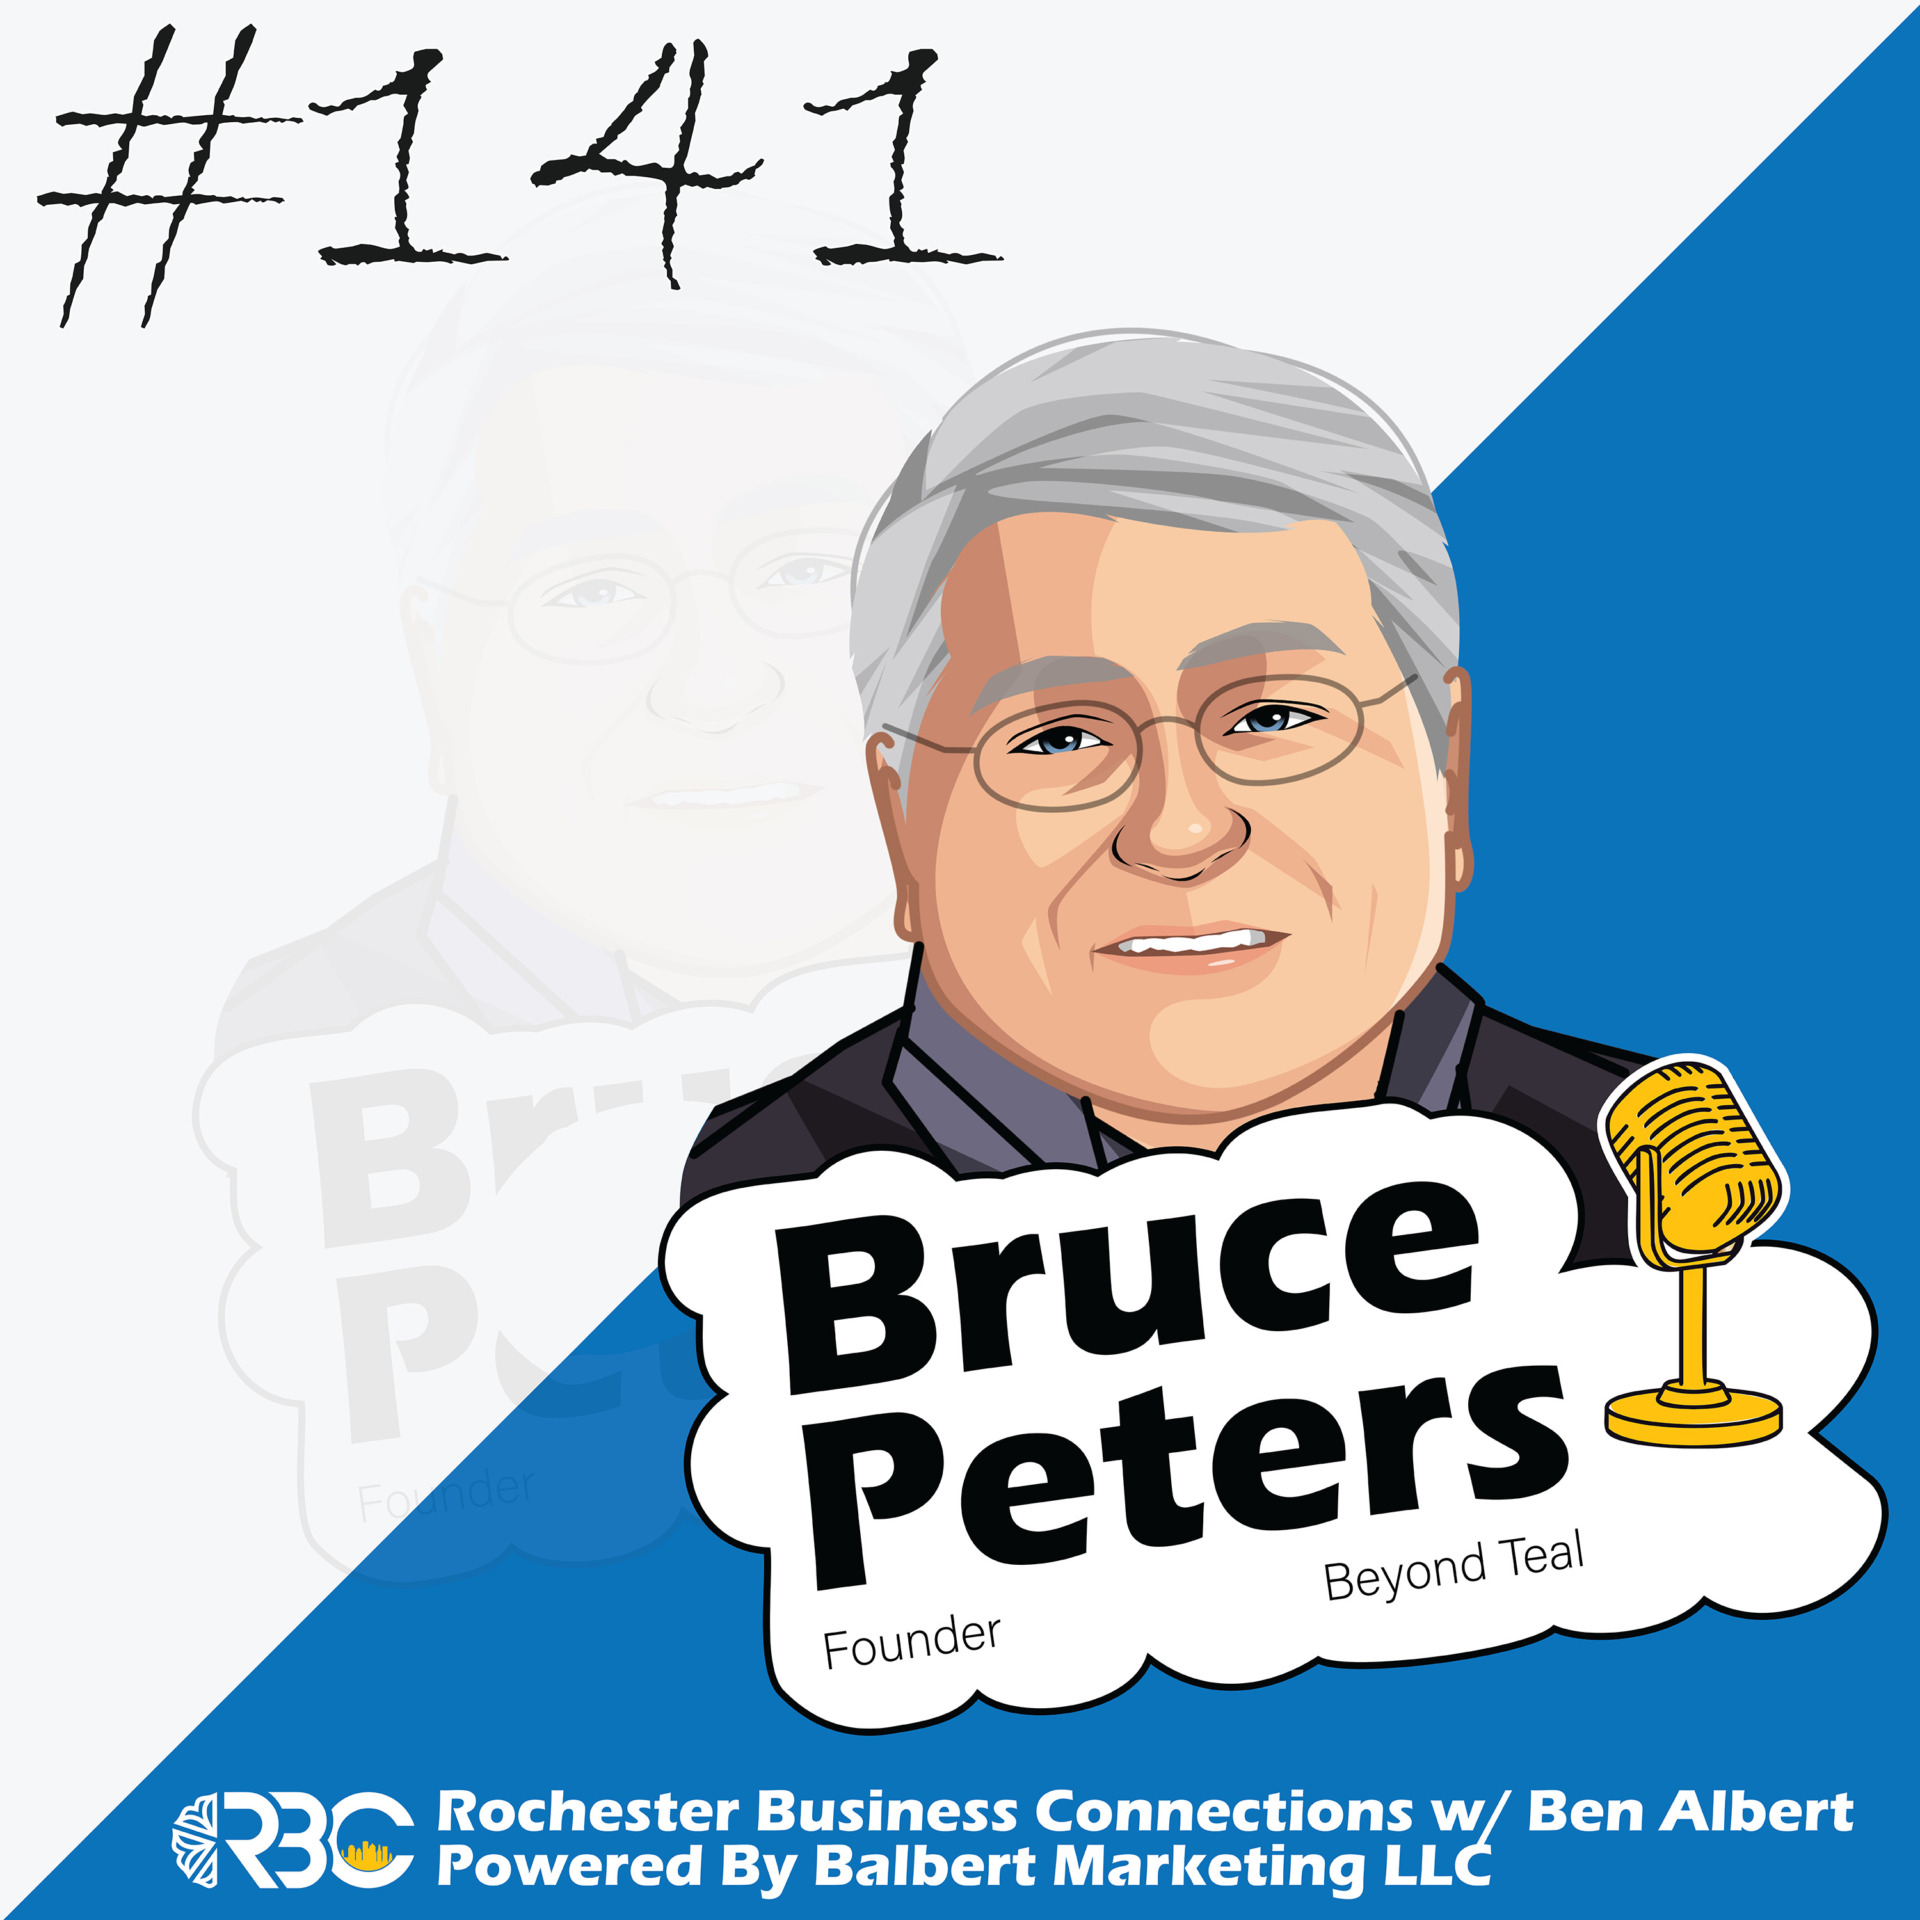 bruce peters on rochester business connections